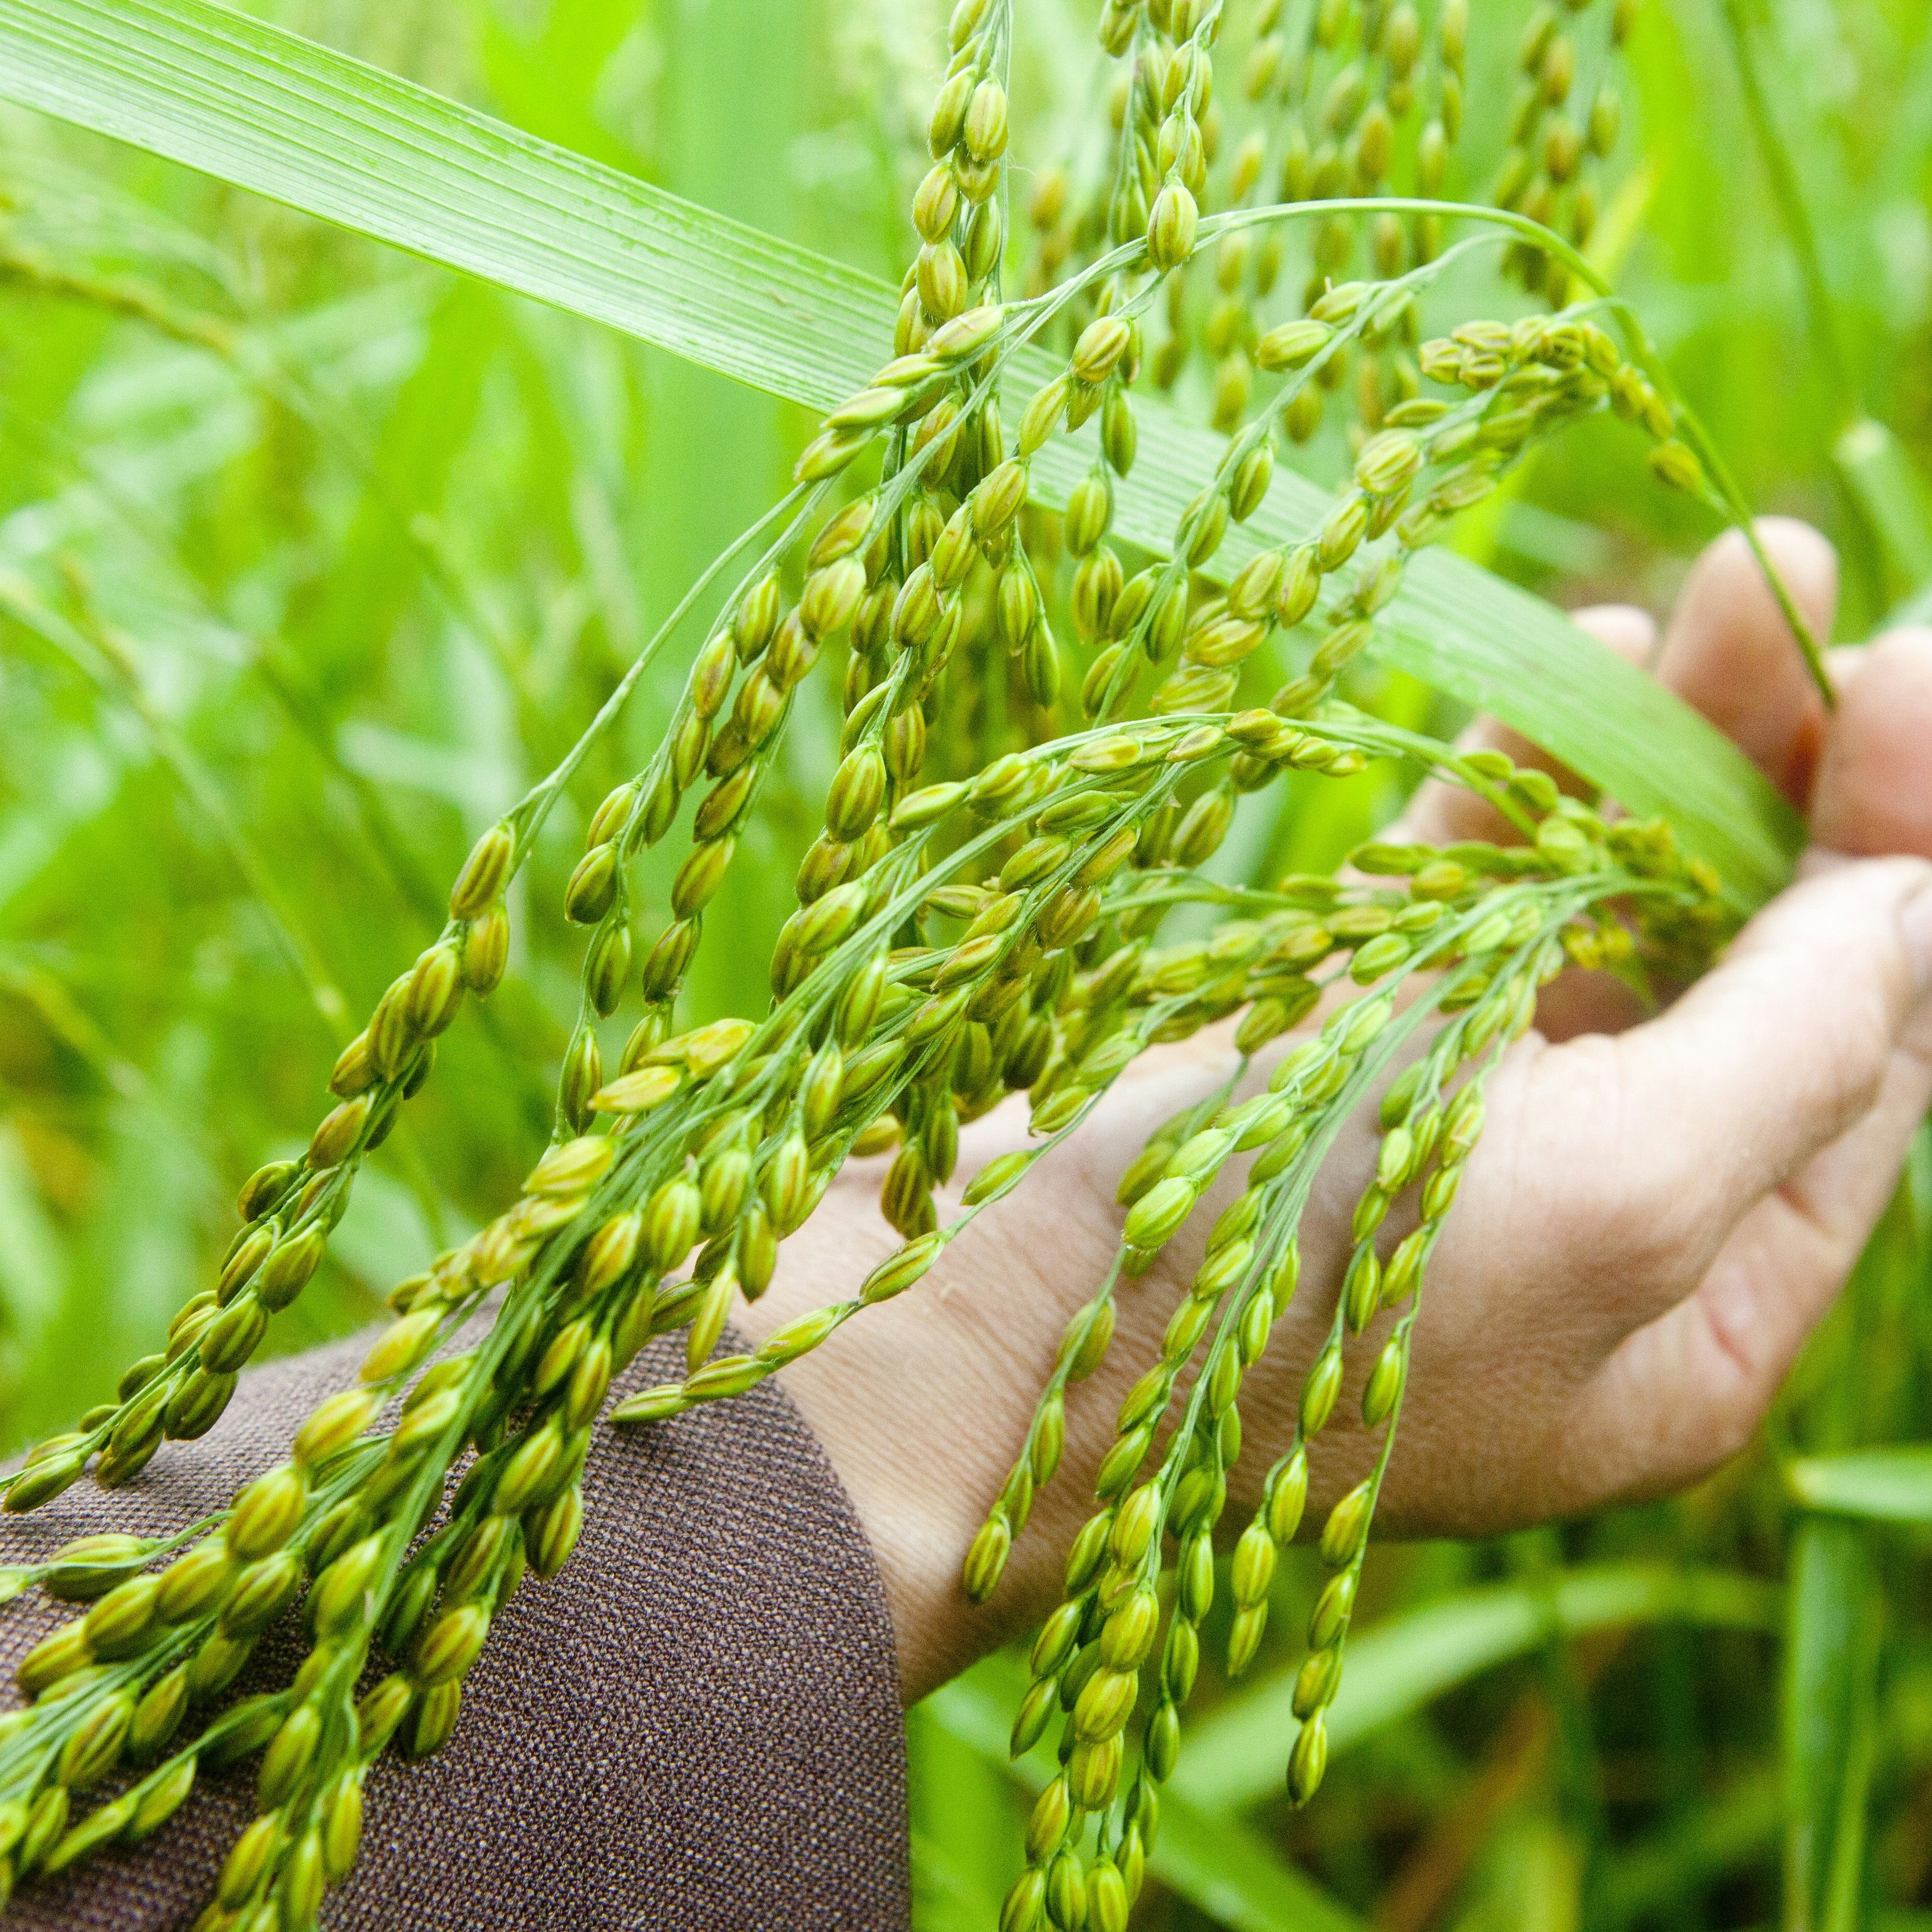 A close up of a hand holding rice growing in a paddy field.